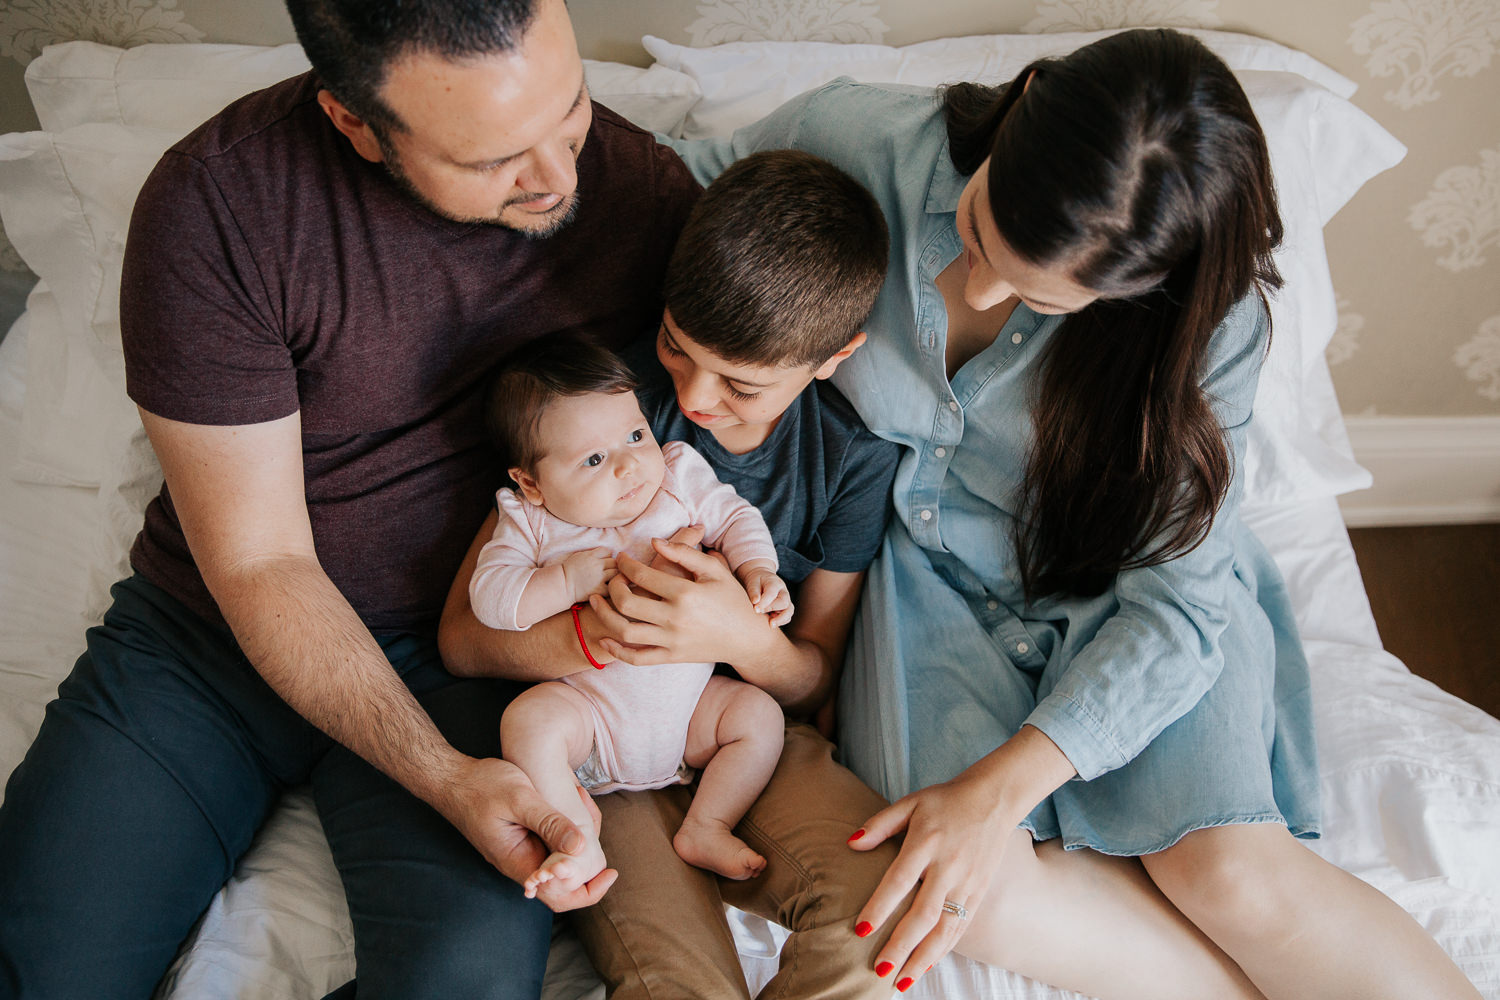 family of four sitting on bed, 9 year old boy holding 2 month old baby sister in pink onesie as mom and dad snuggled next to them - Newmarket Lifestyle Photography